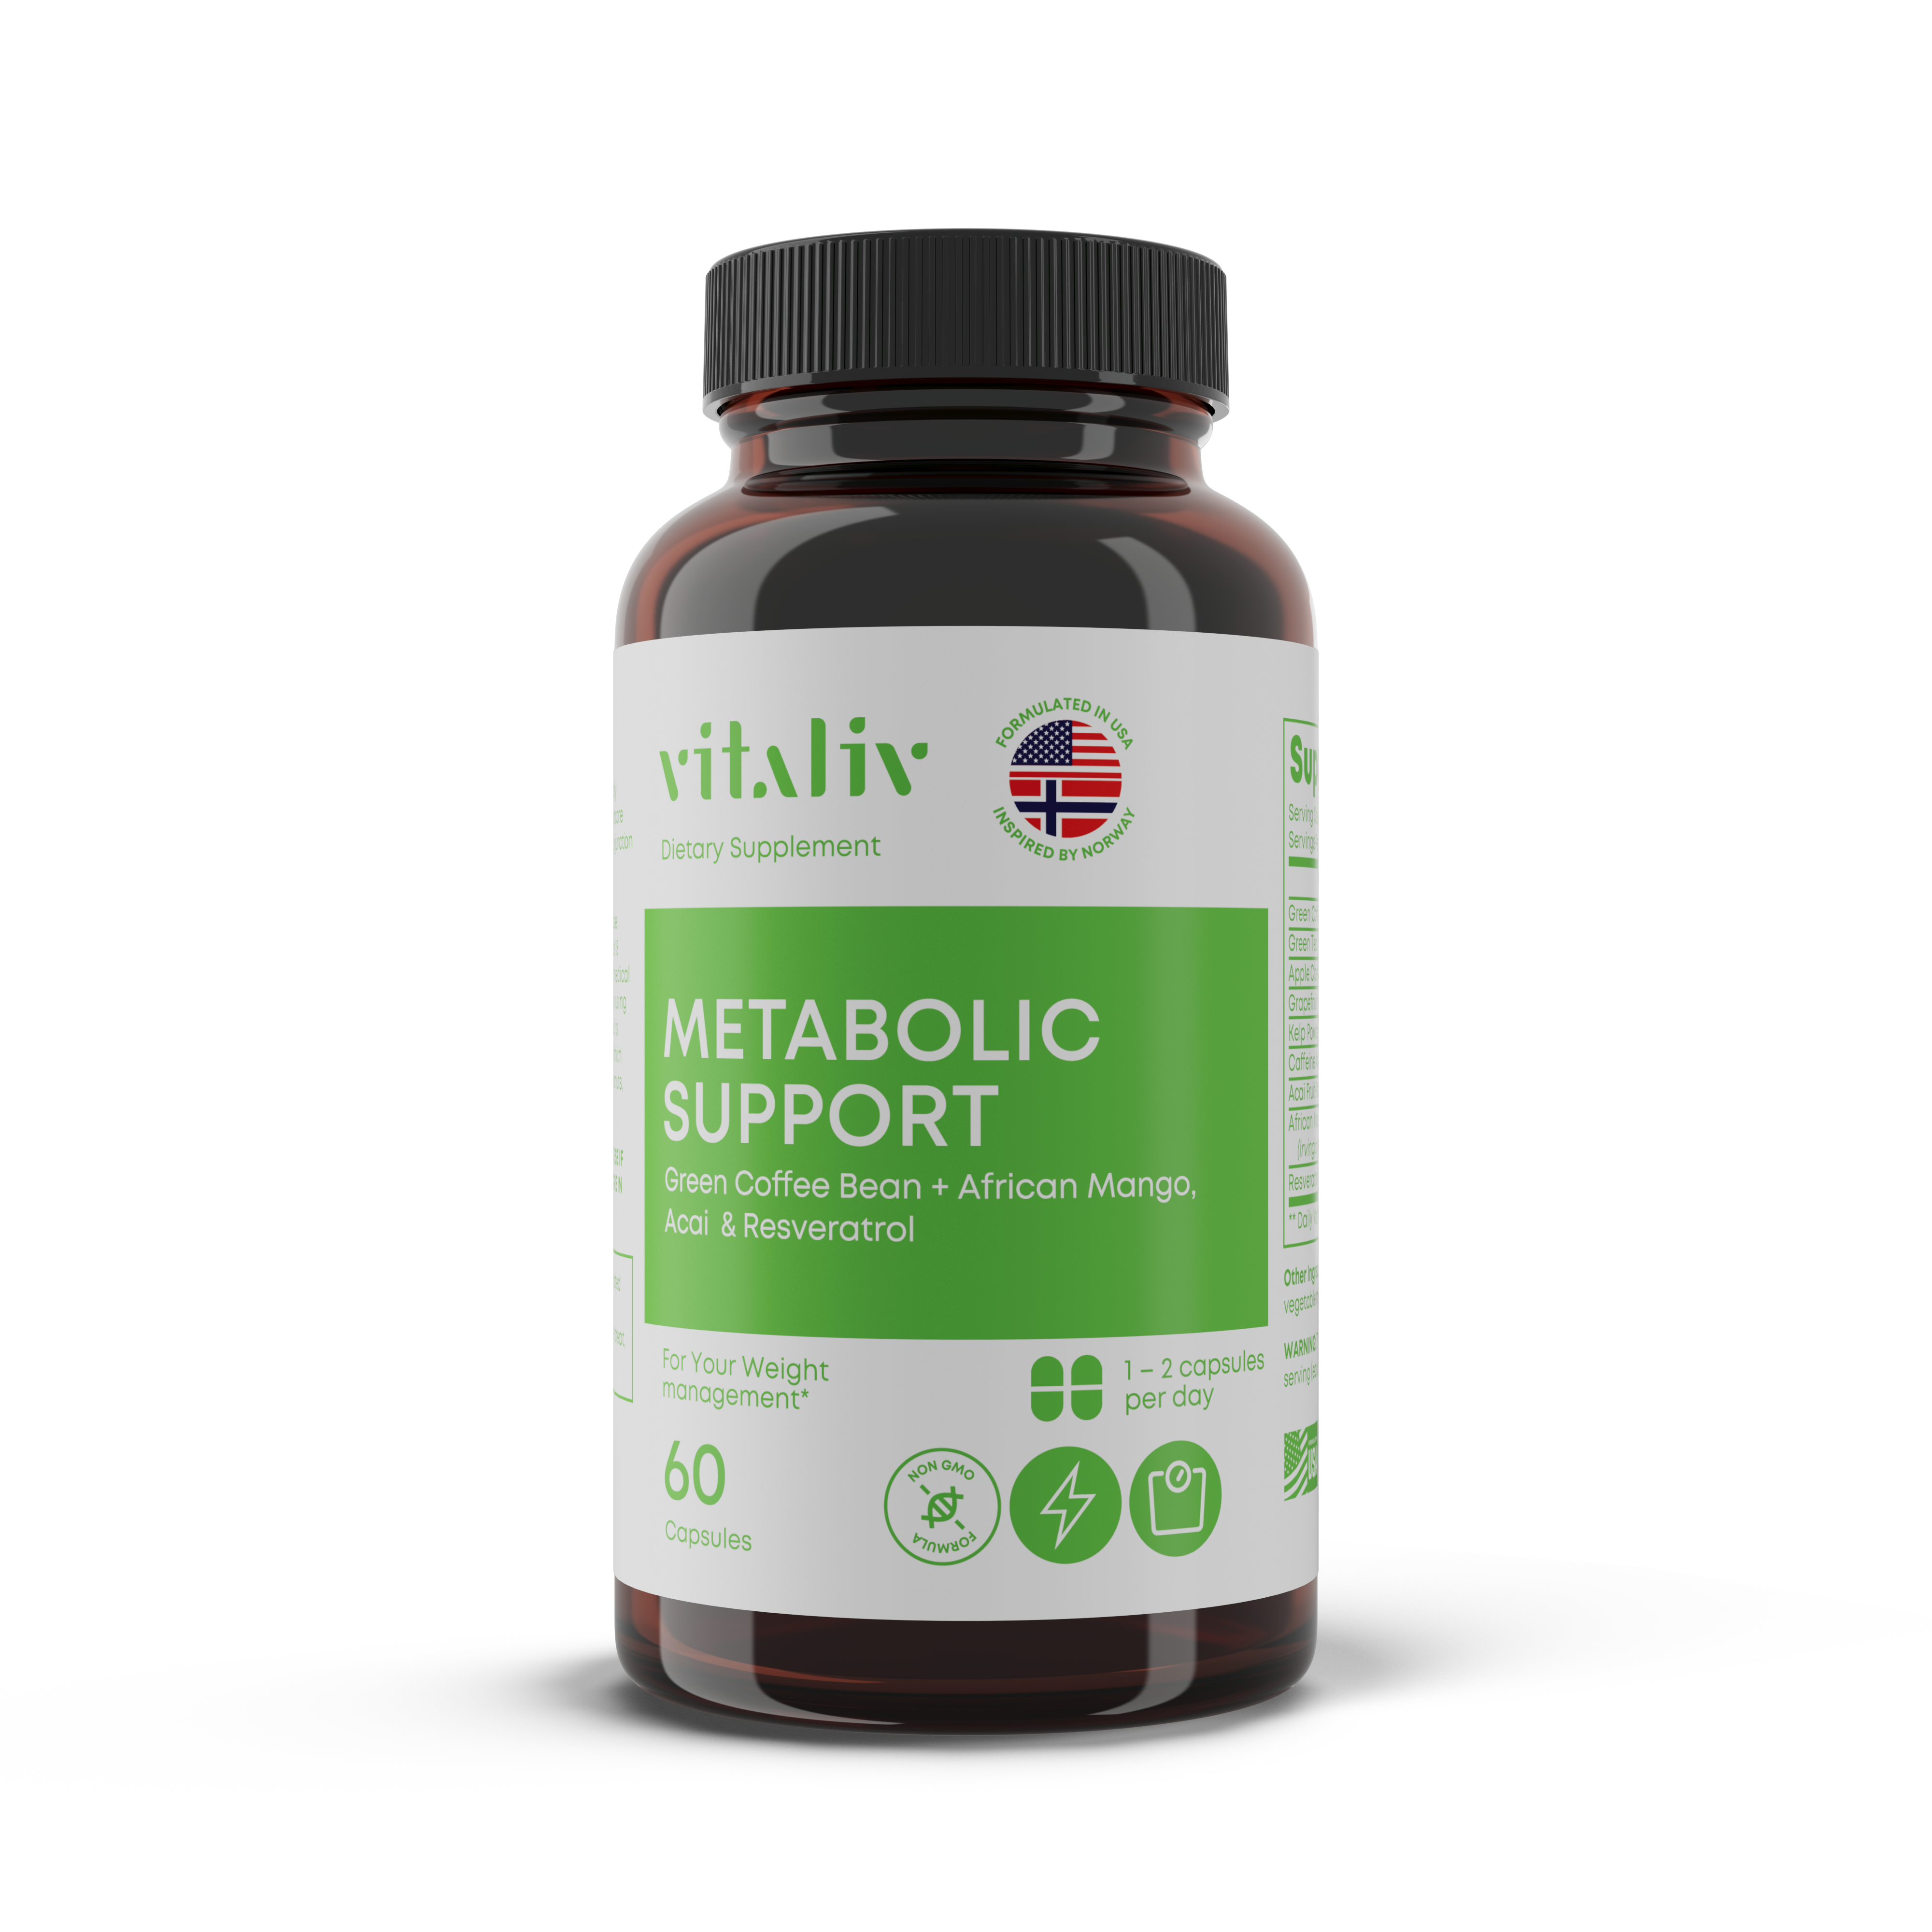 Daily metabolic support